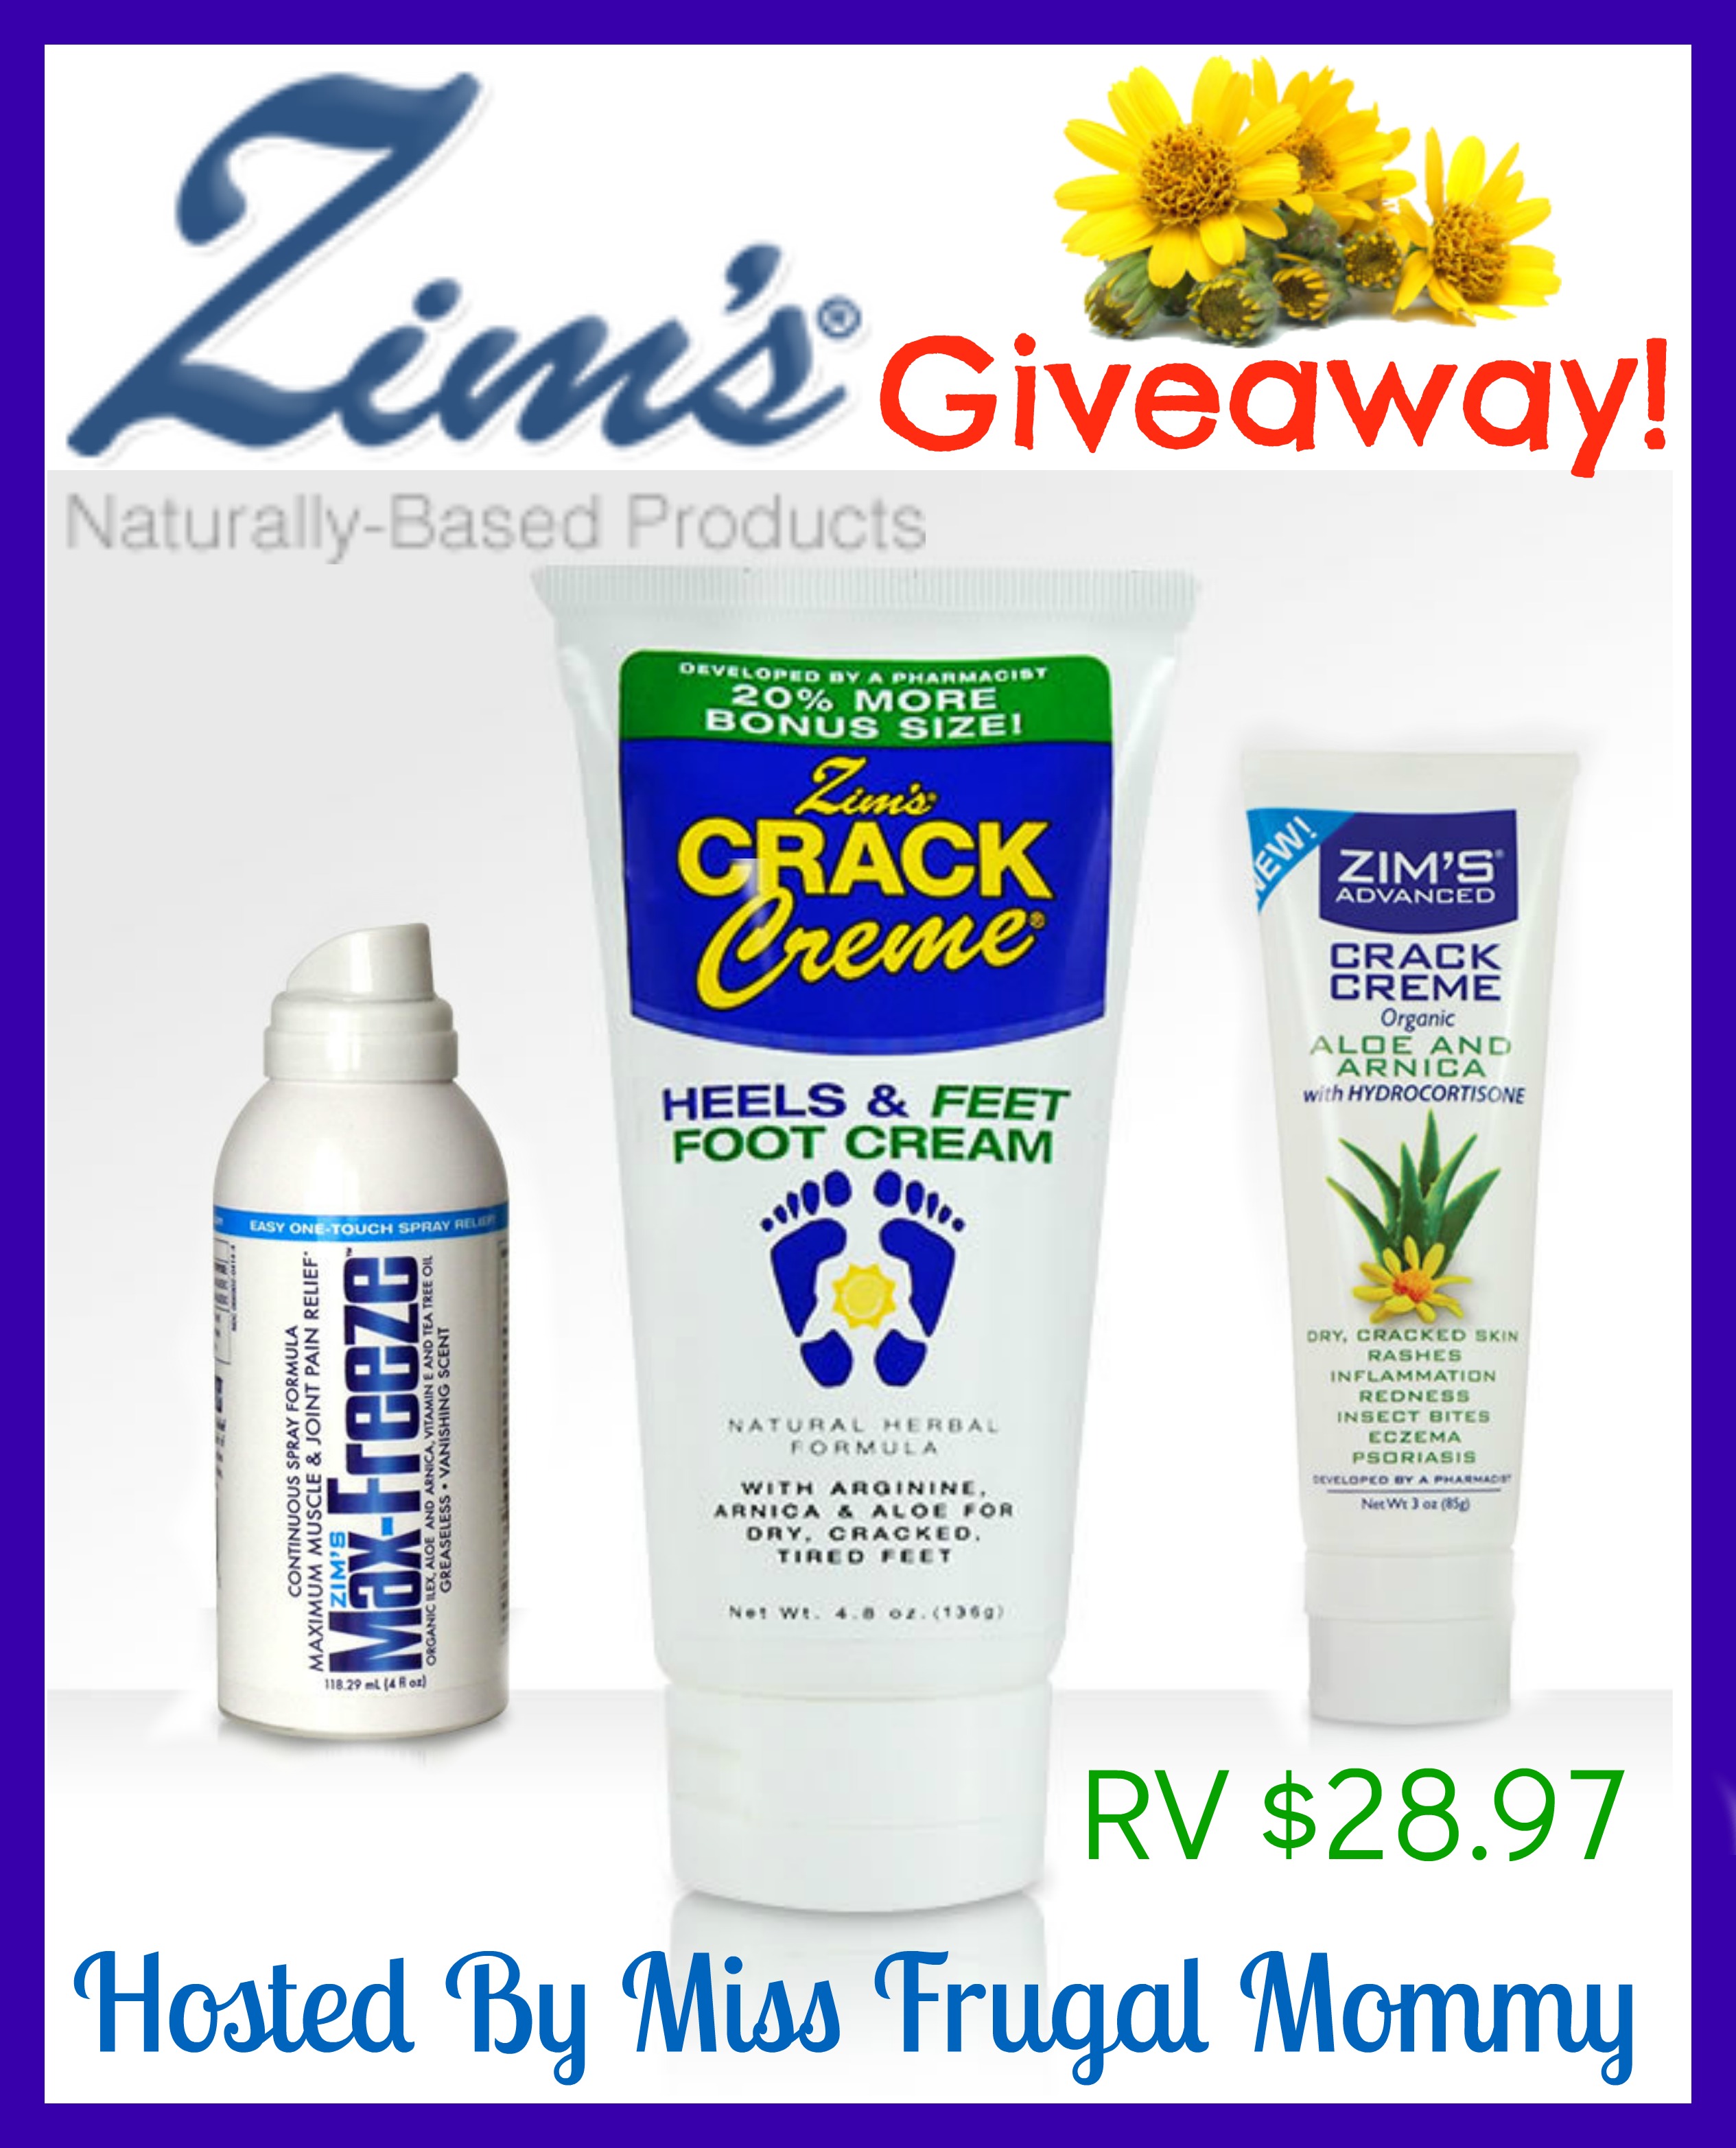 Zim's Naturally Based Products Giveaway